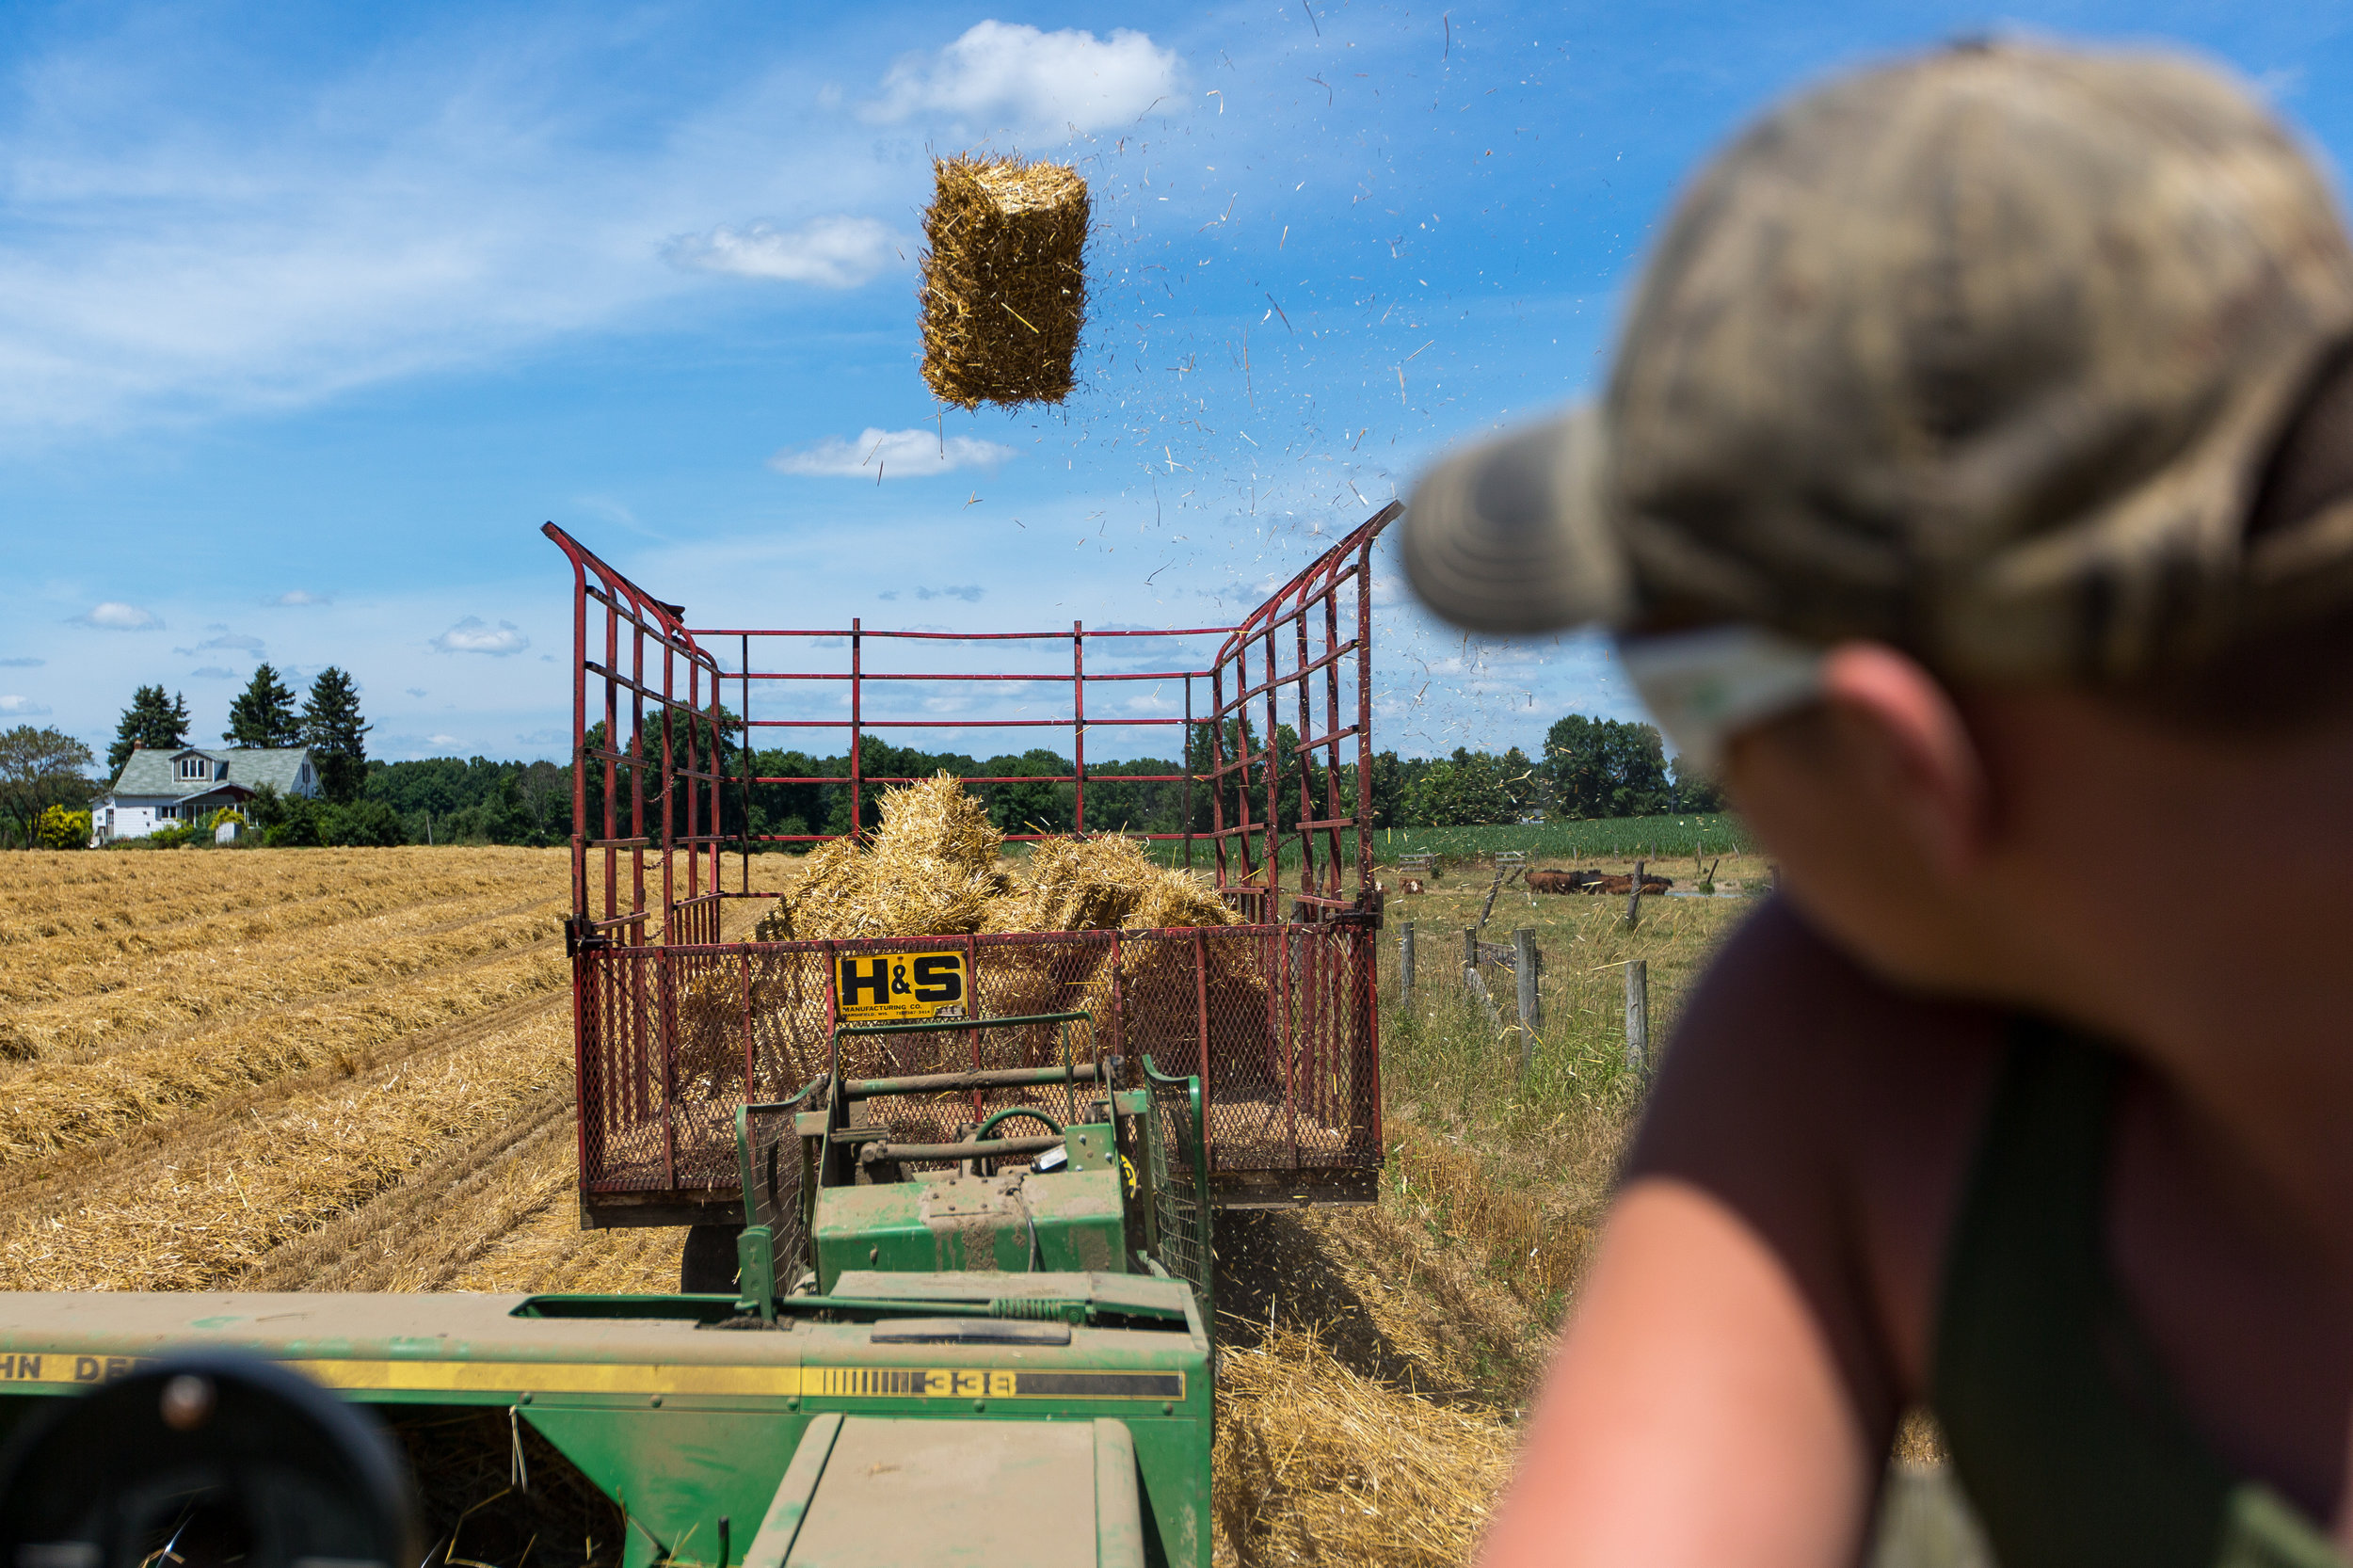  aaron Sniezek, 16, watches as a bail of straw is thrown into a collection trailer at his families farm near New Castle on Sunday afternoon. Sniezek is a third generation farmer on his families 300 acres of wheat, corn, soy, oats and hay.  